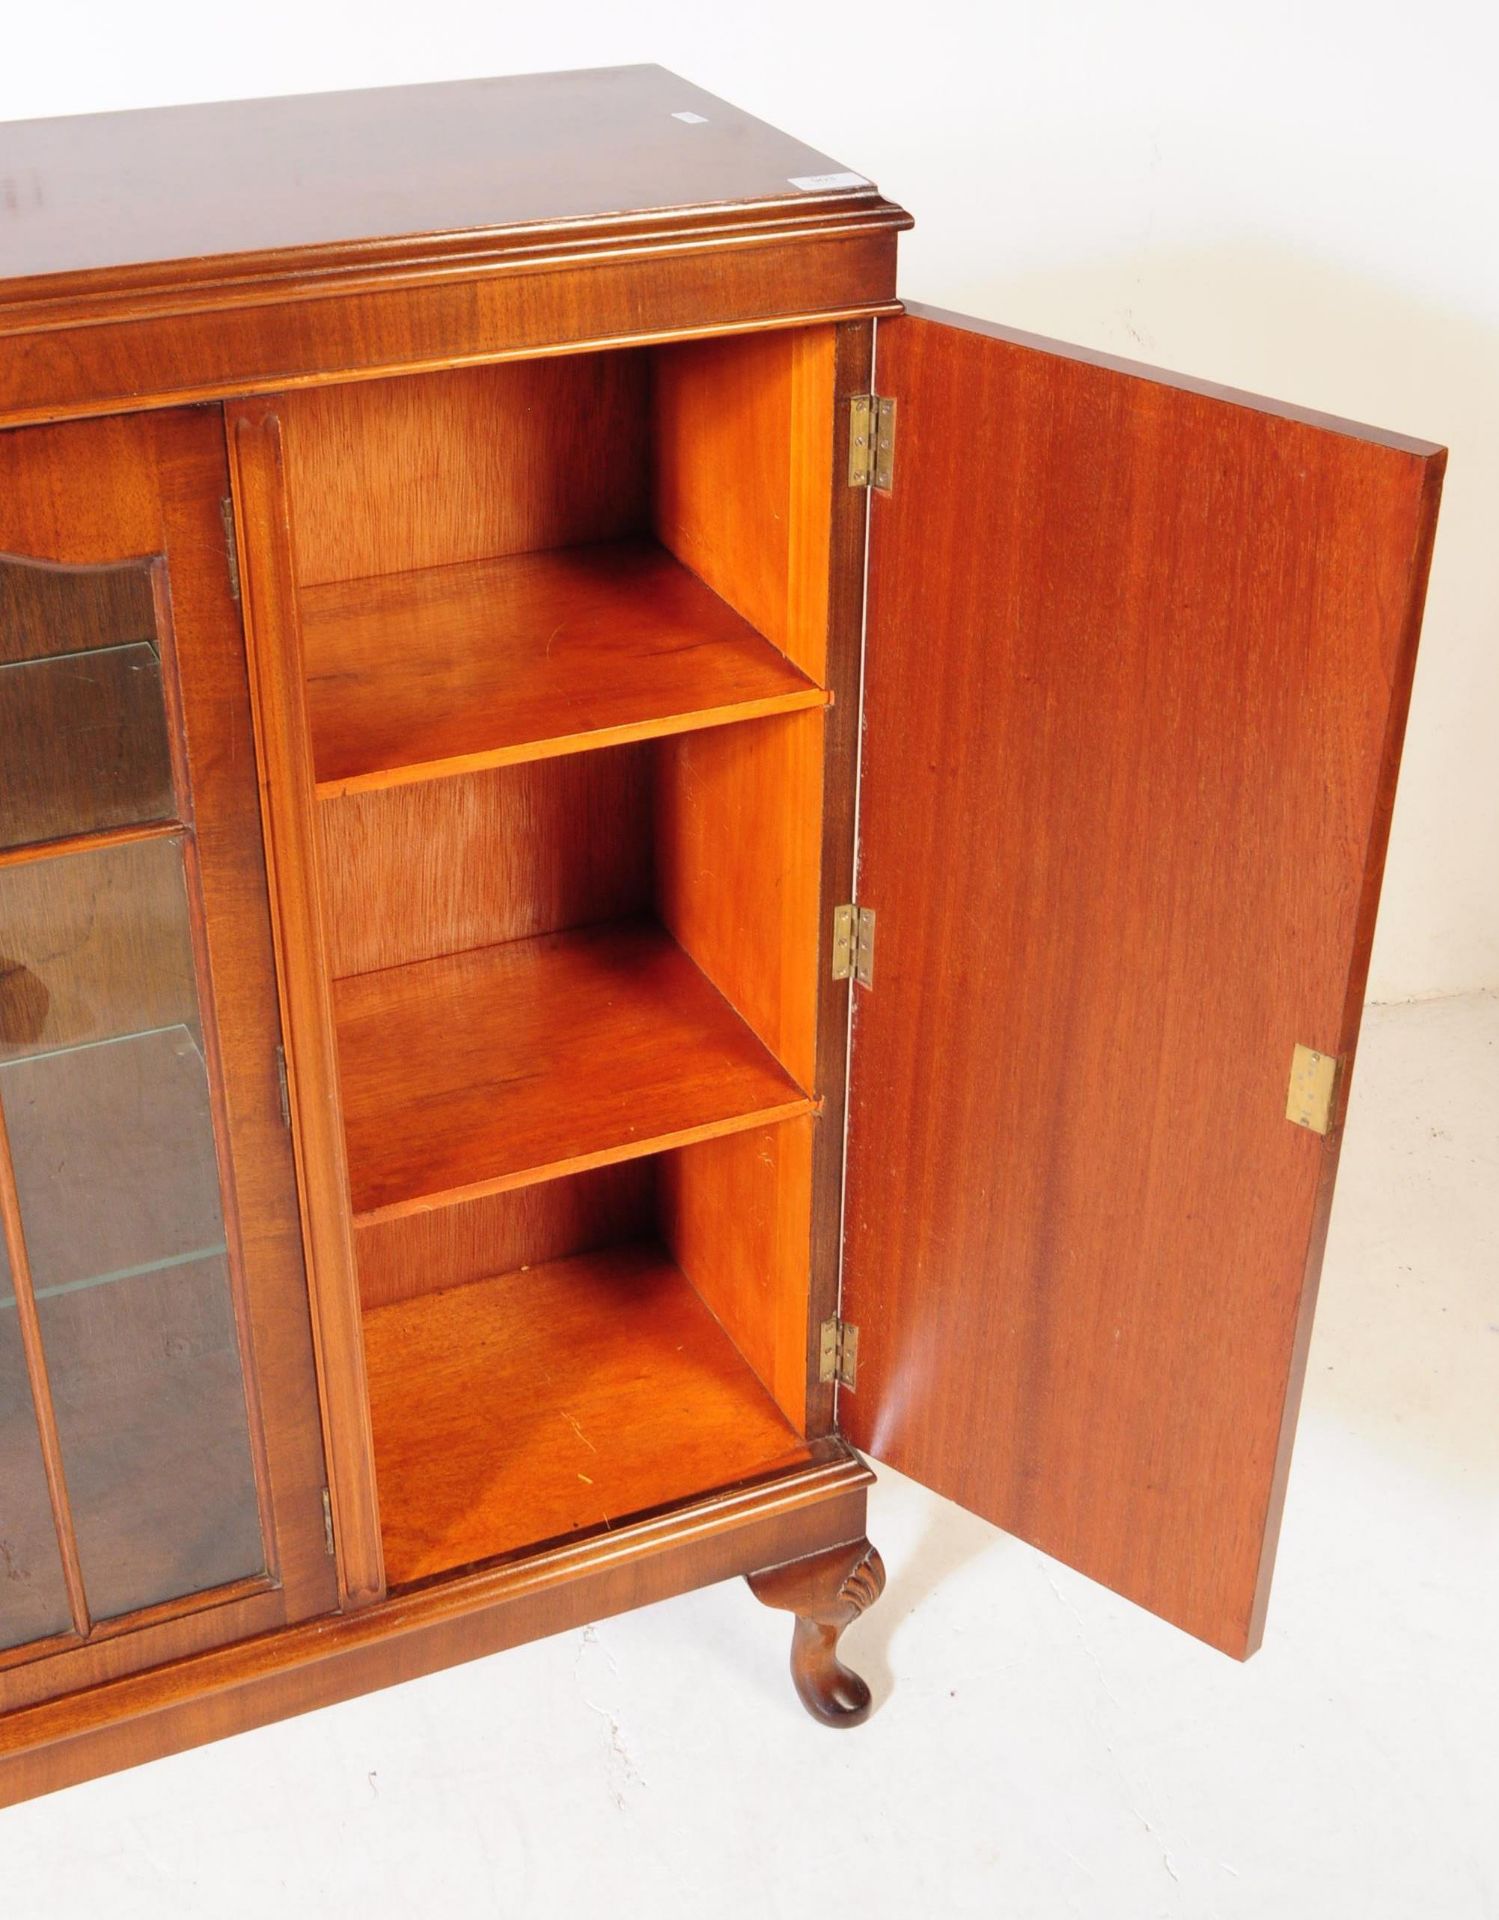 1940S QUEEN ANNE REVIVAL WALNUT BOOKCASE - Image 3 of 4